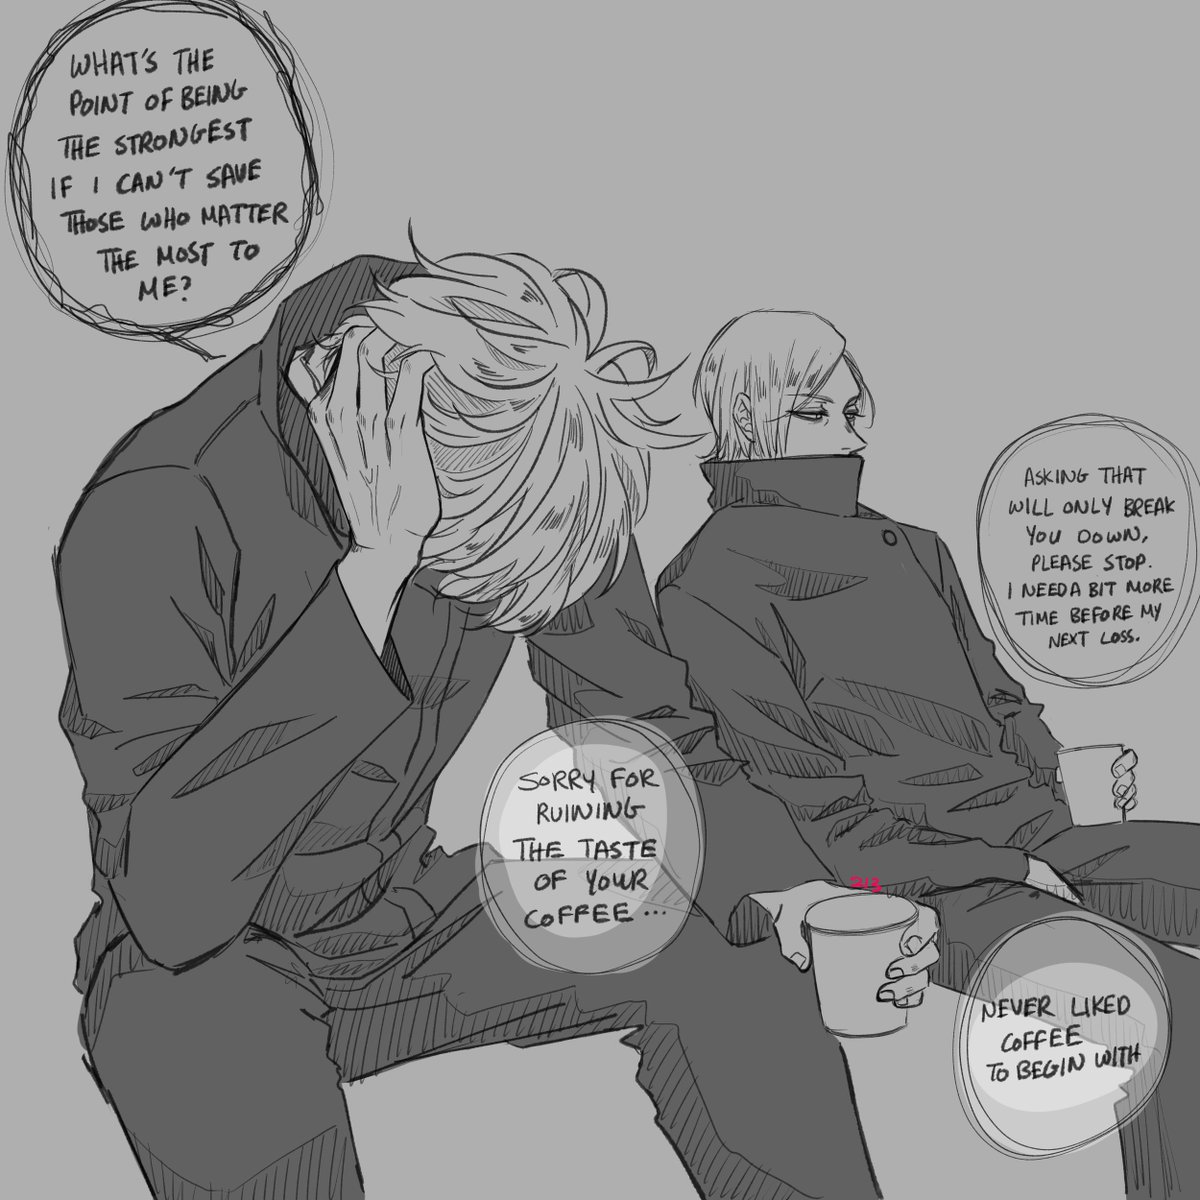 Hello, good morning. I found this old art of the two boys who were left behind by their besties.
My ref was a frame from a backstreet boys song lol.
#iLoveJJKAngestAndPain 